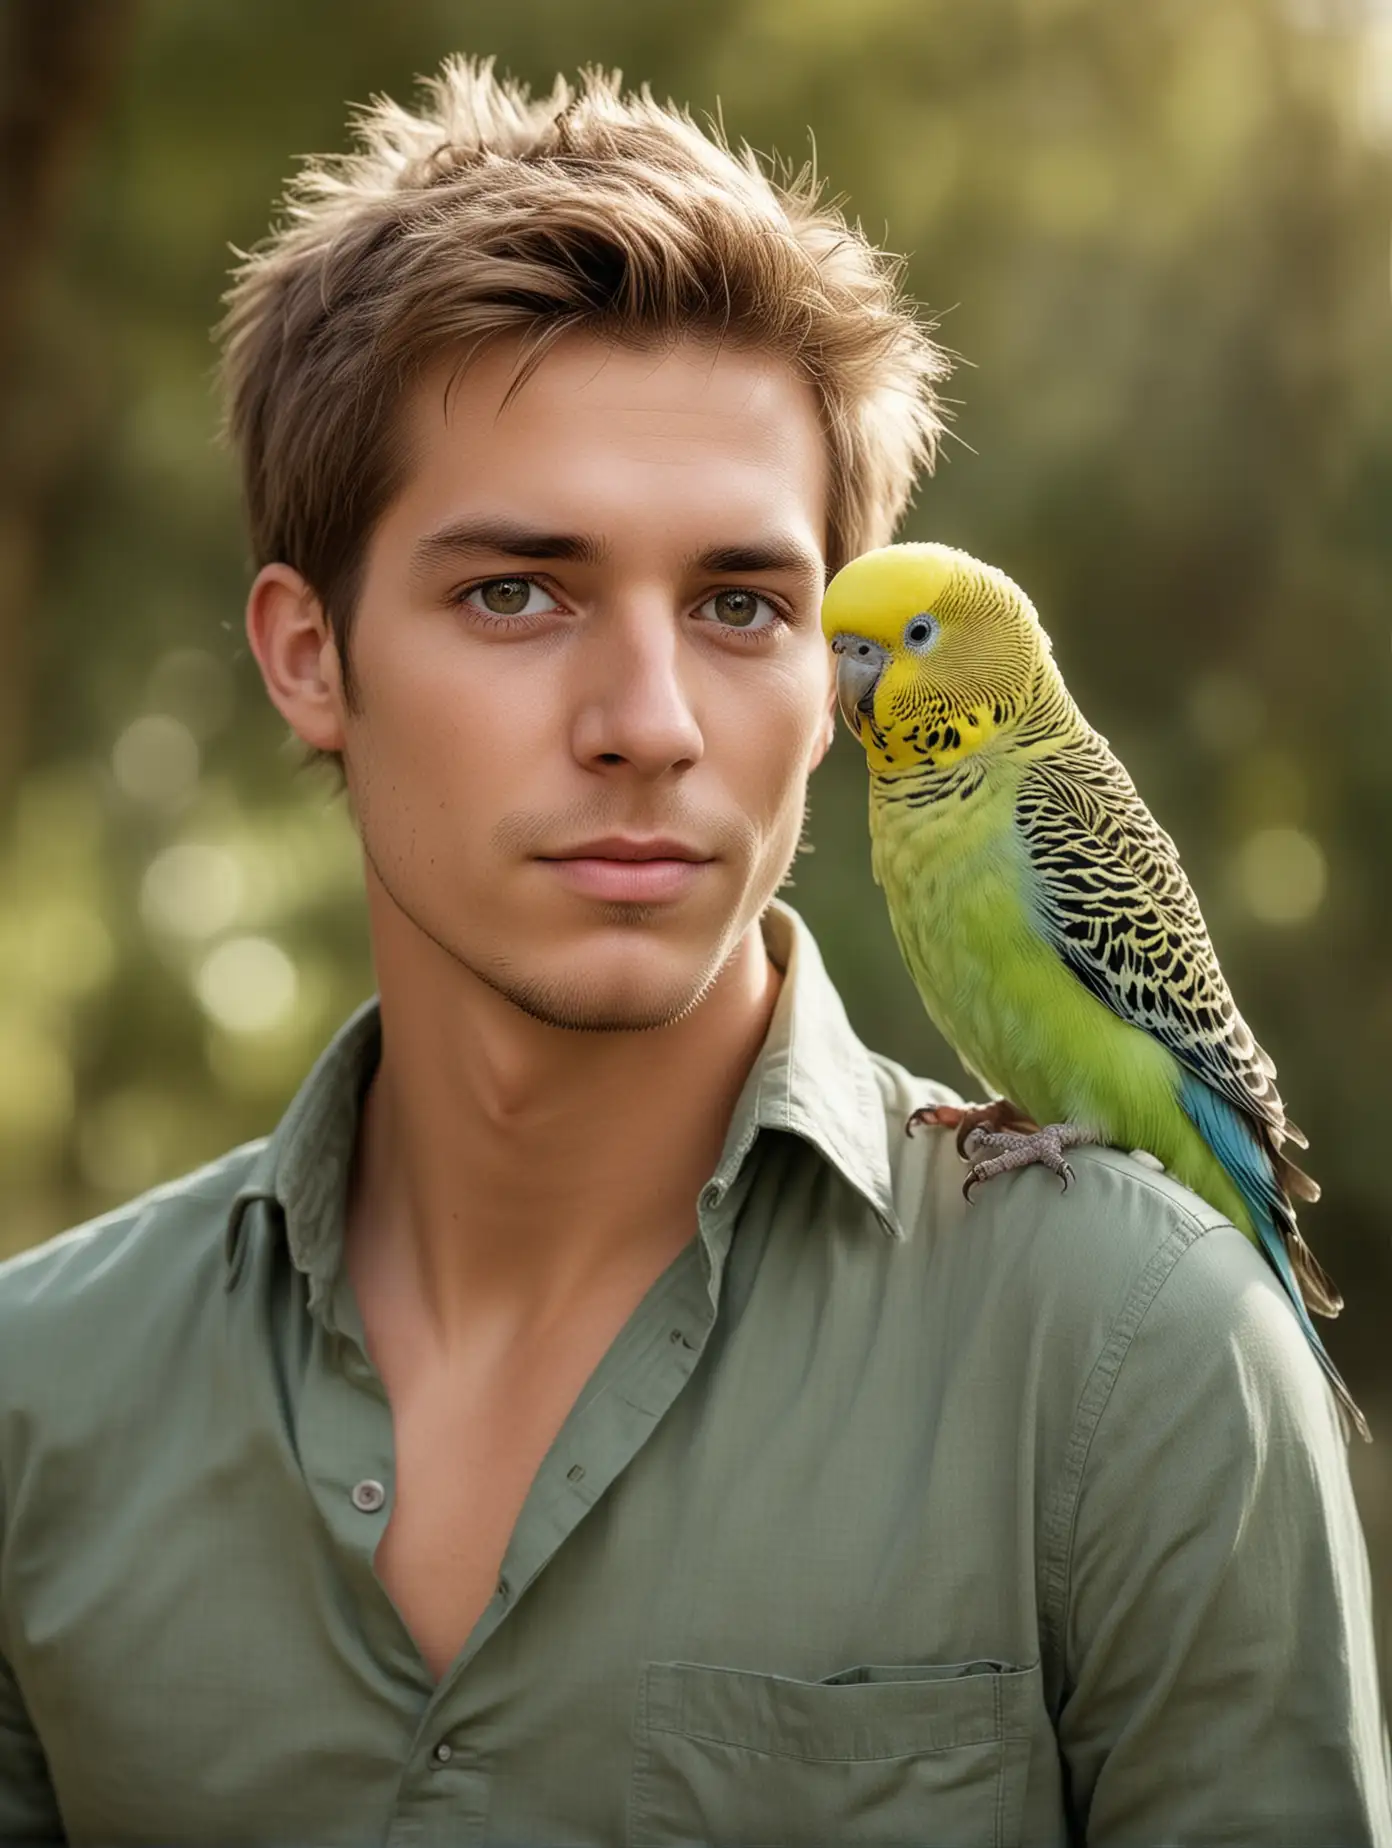 A handsome young man, a budgerigar, outdoors, exquisite facial features, facing the camera, professional photography techniques, full body portrait